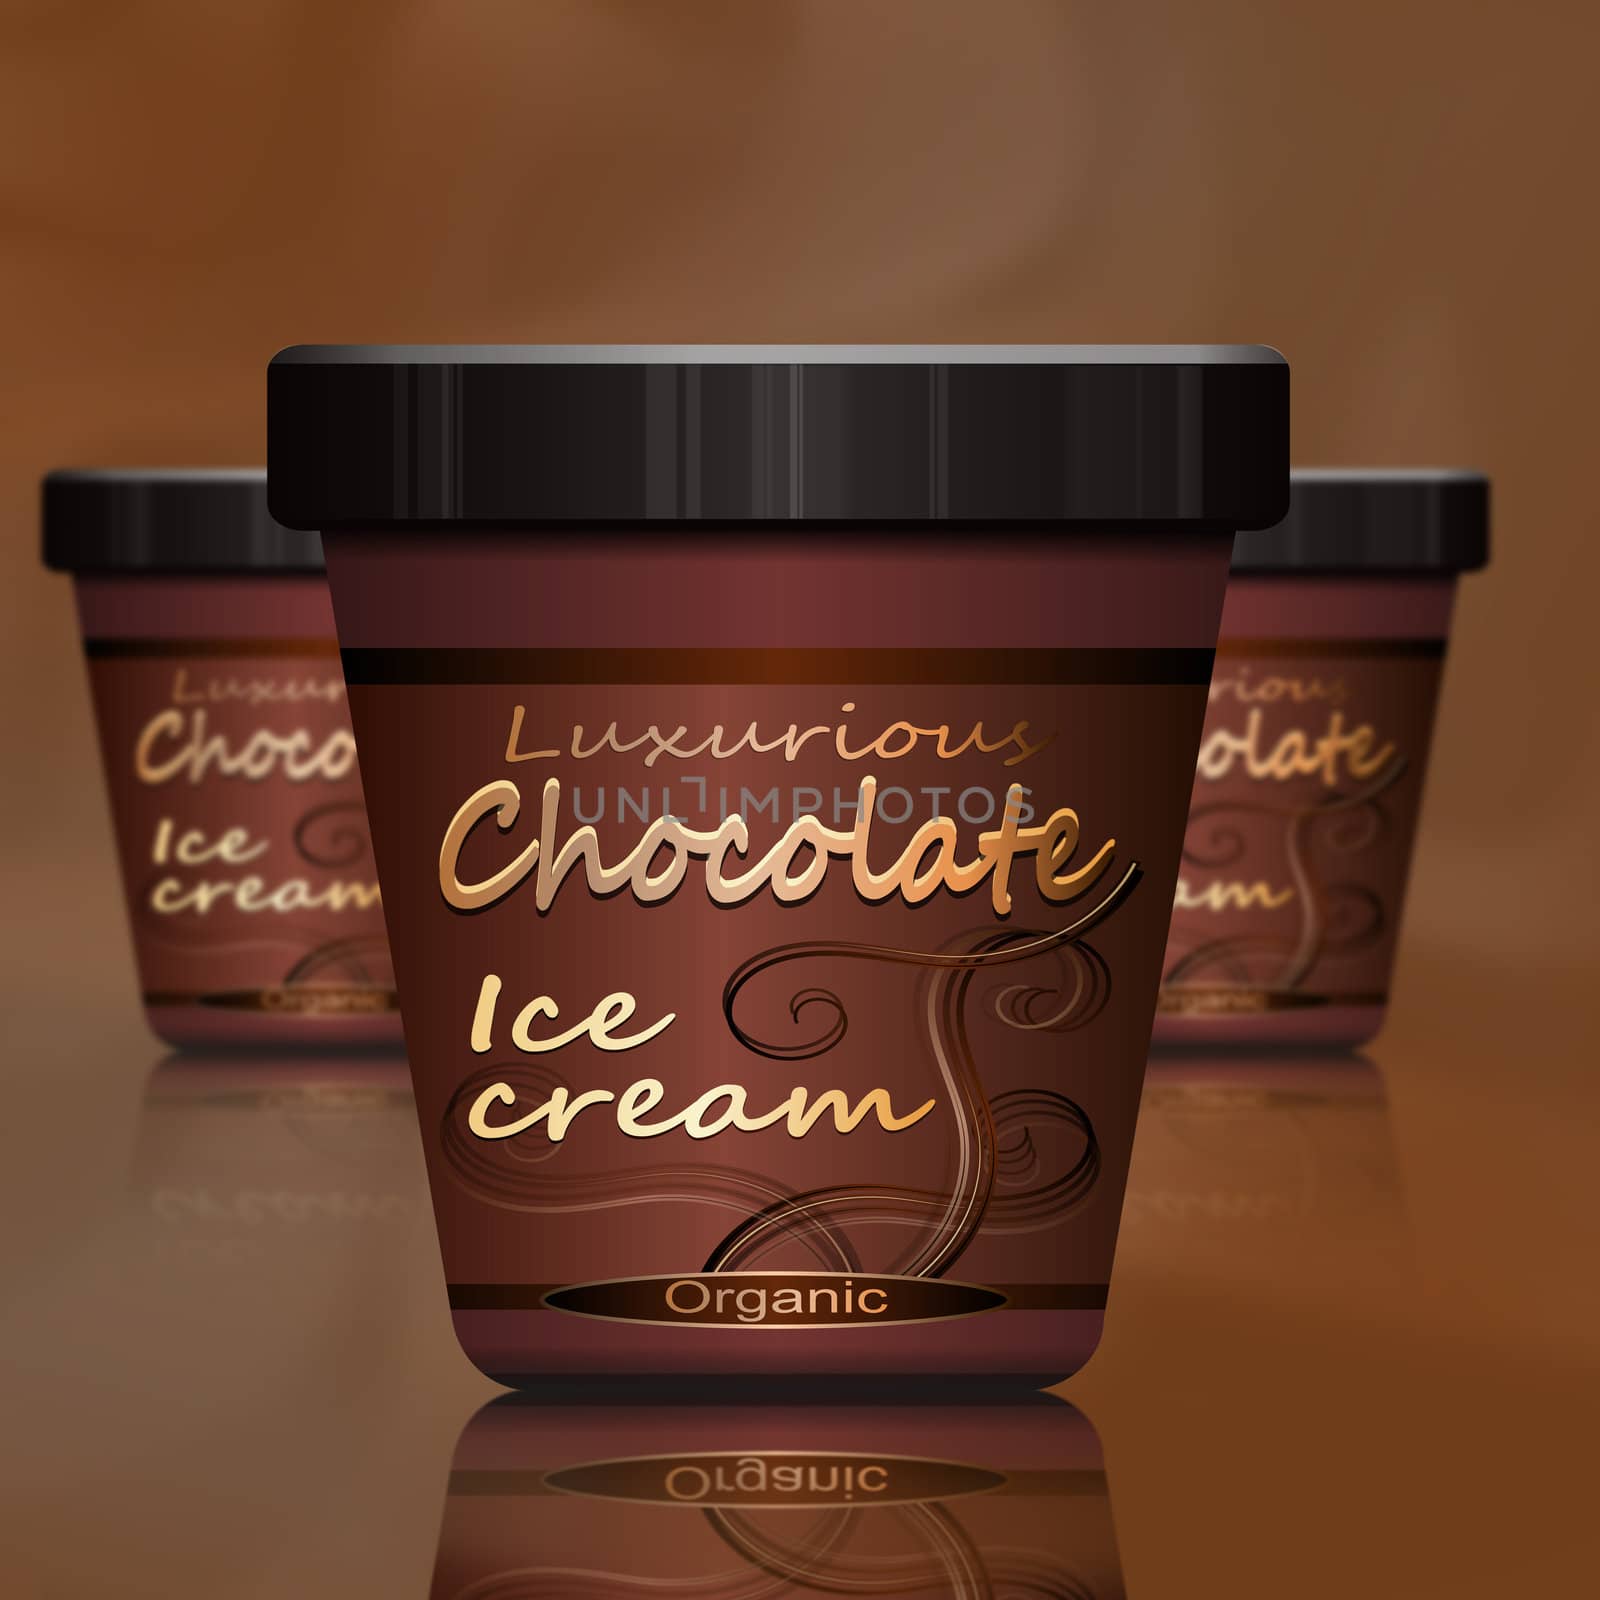 Chocolate ice cream. by 72soul